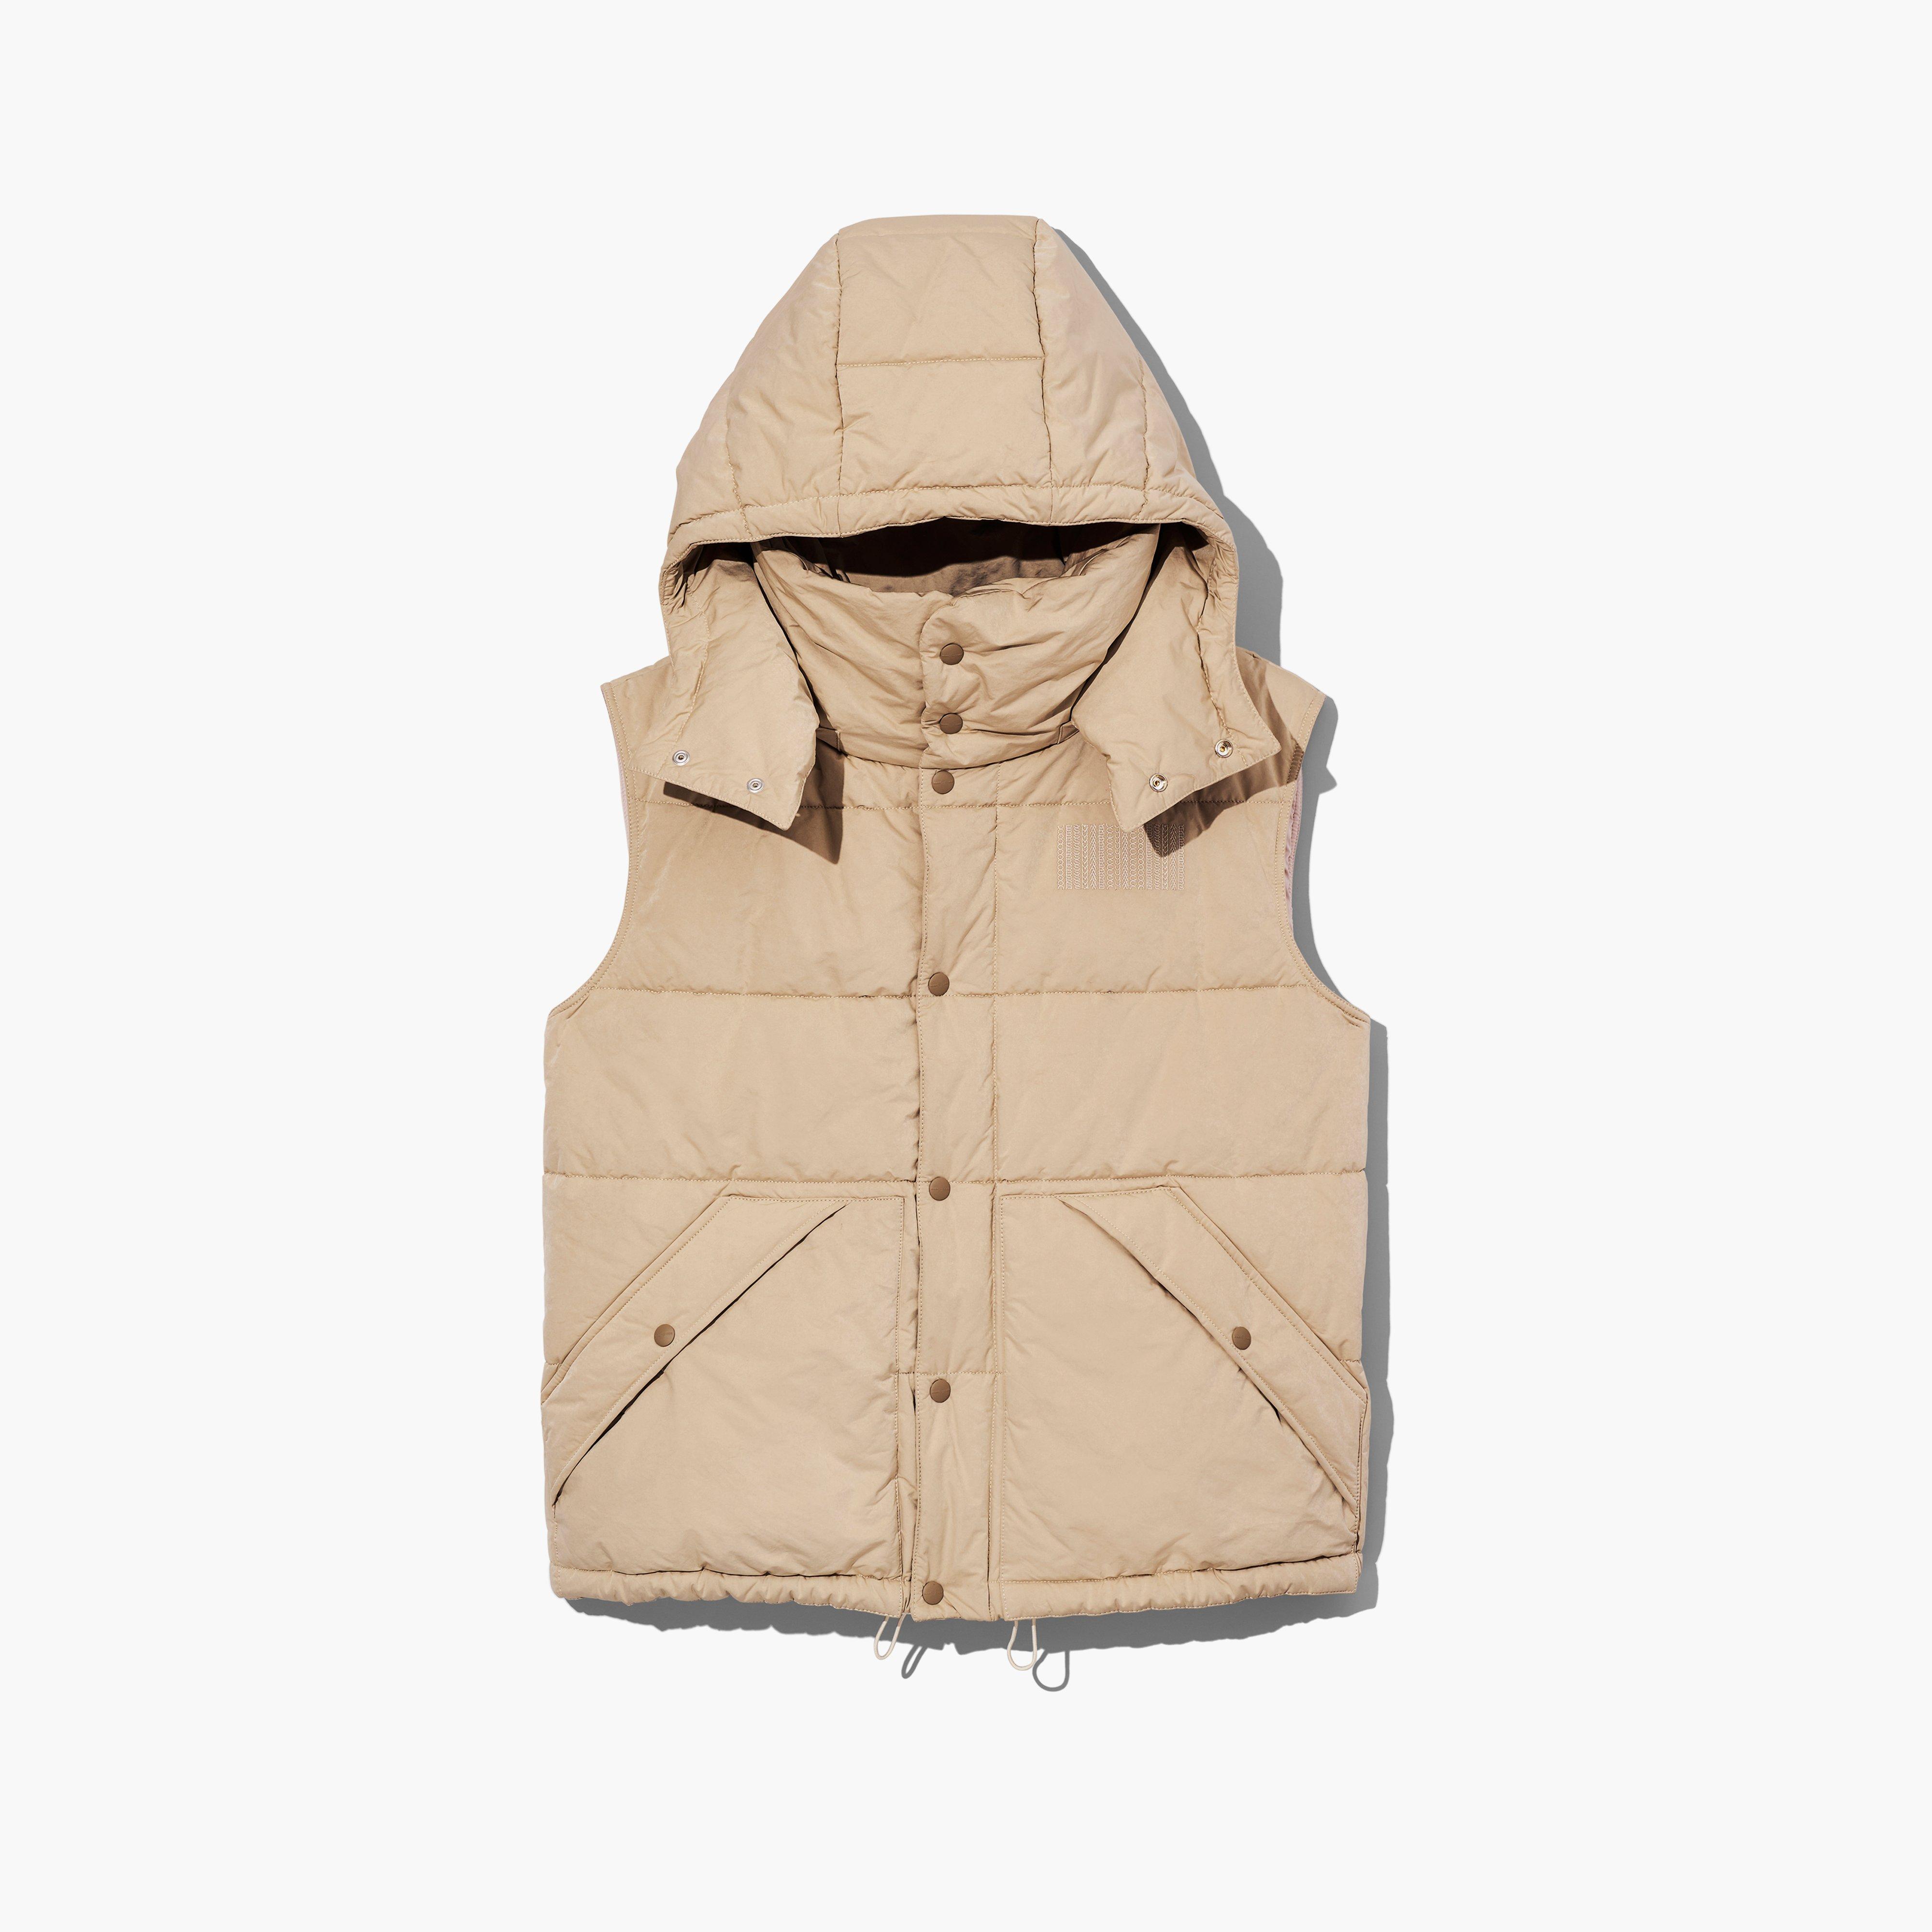 Marc by Marc jacobs The Oversized Puffer Vest,BEIGE